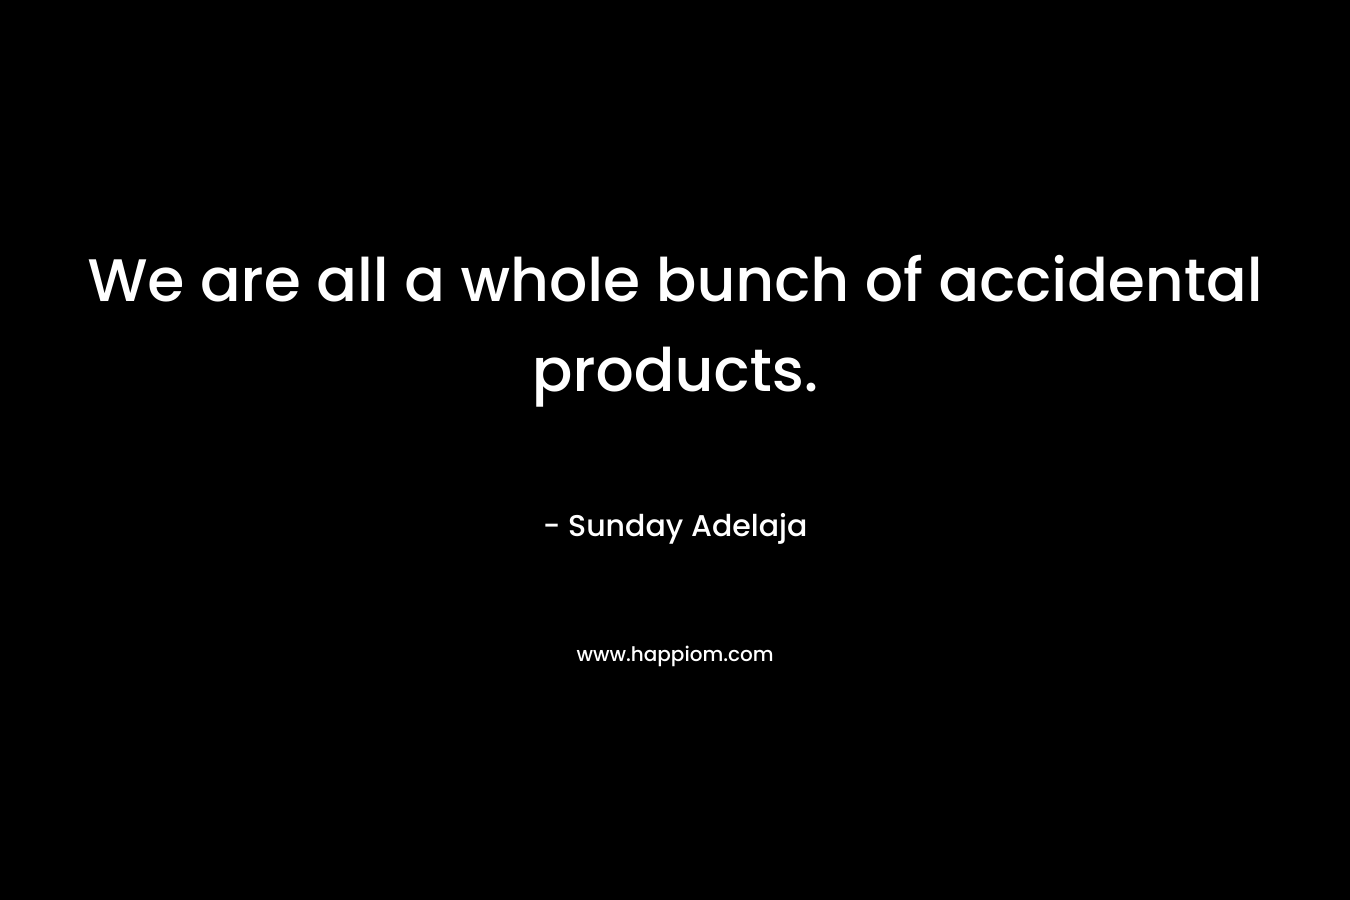 We are all a whole bunch of accidental products.